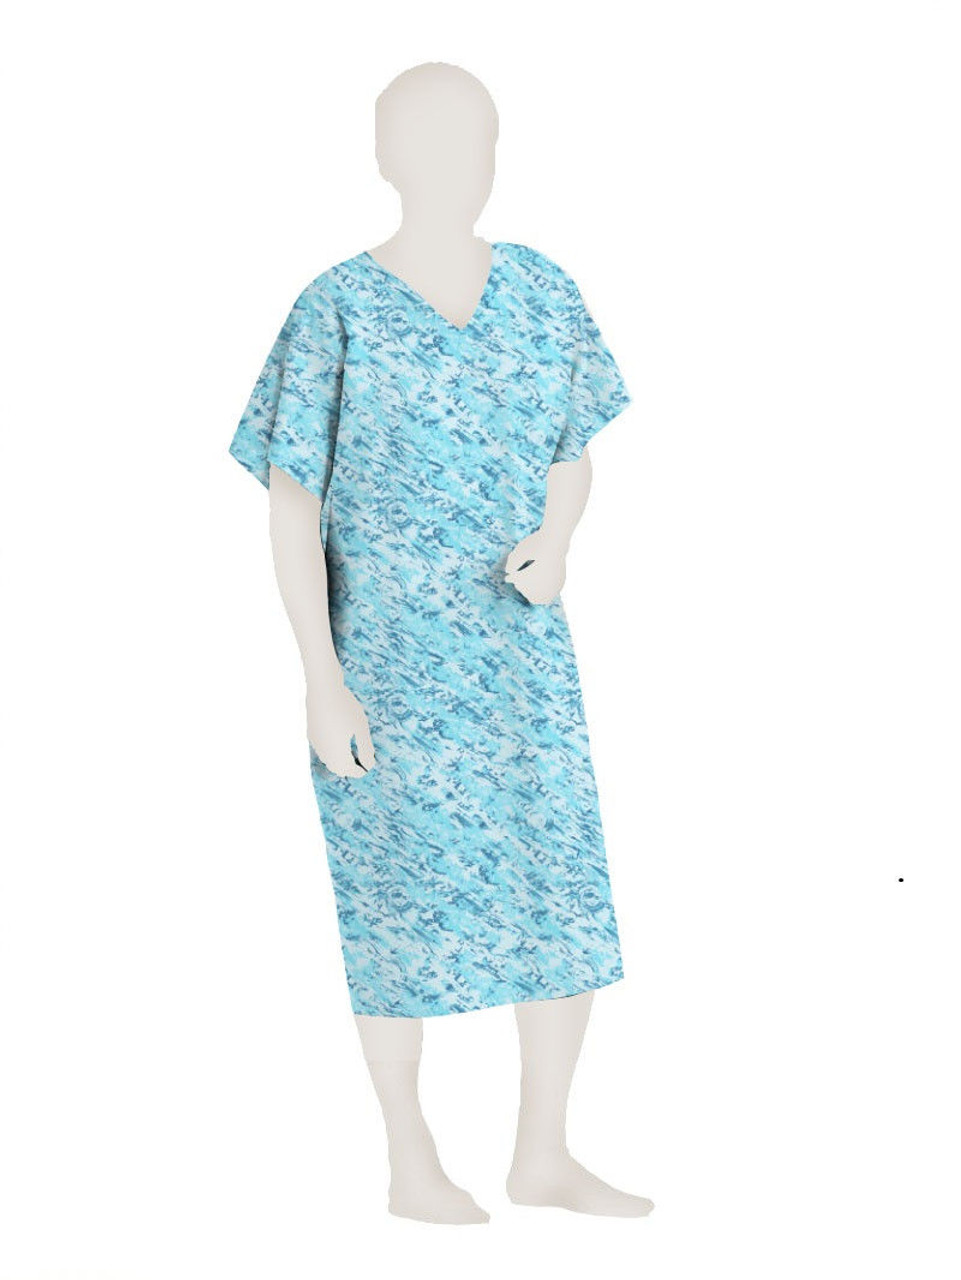 Blue patient gown with snowflake print - USL Medical